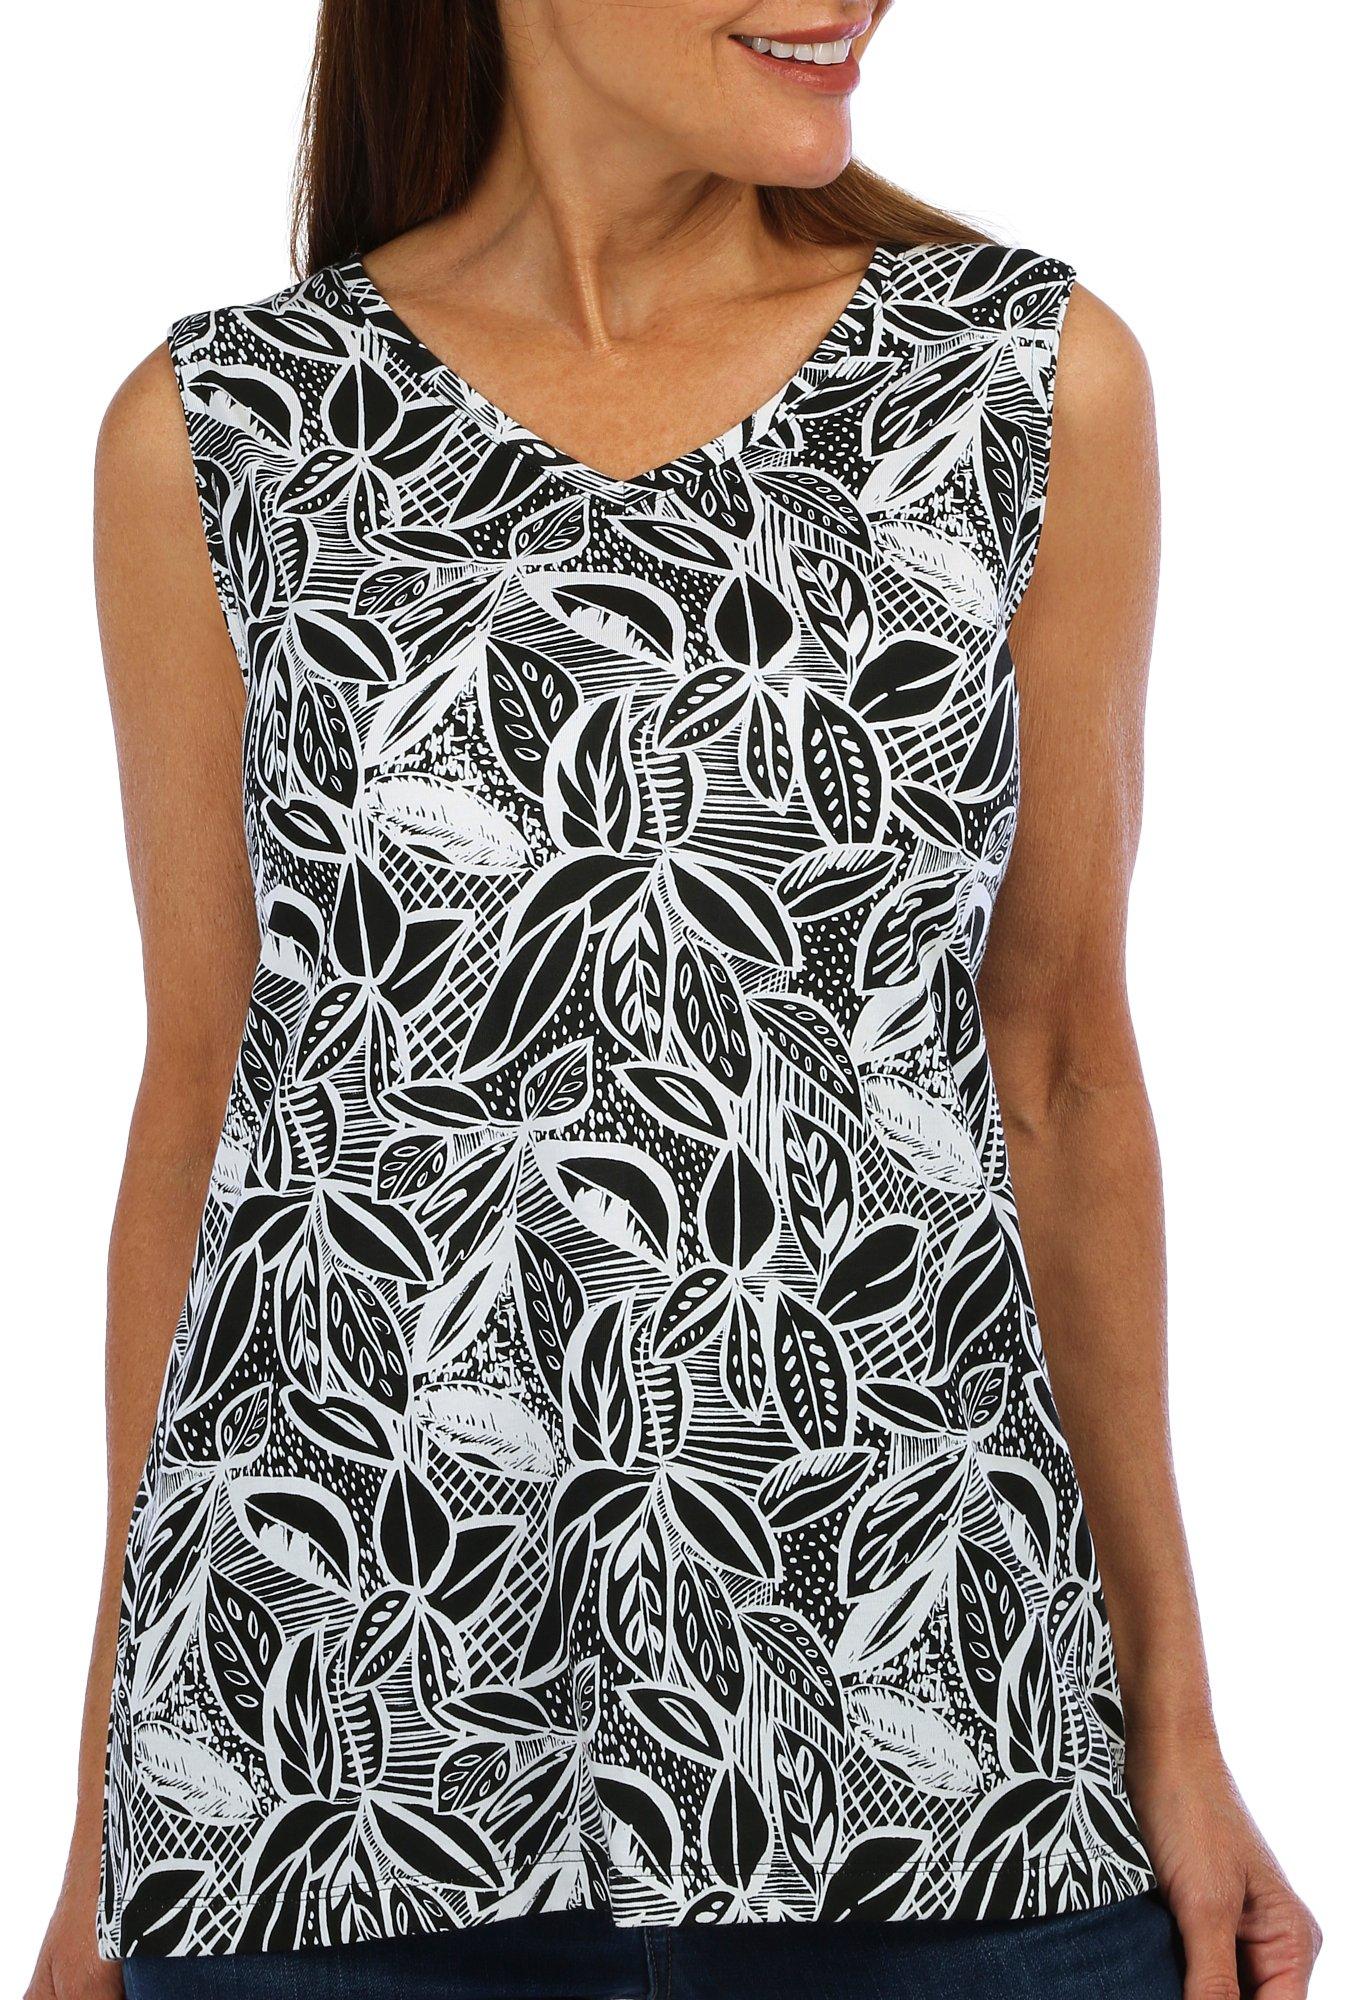 Coral Bay Womens Tropical Leaves V-Neck Sleeveless Top